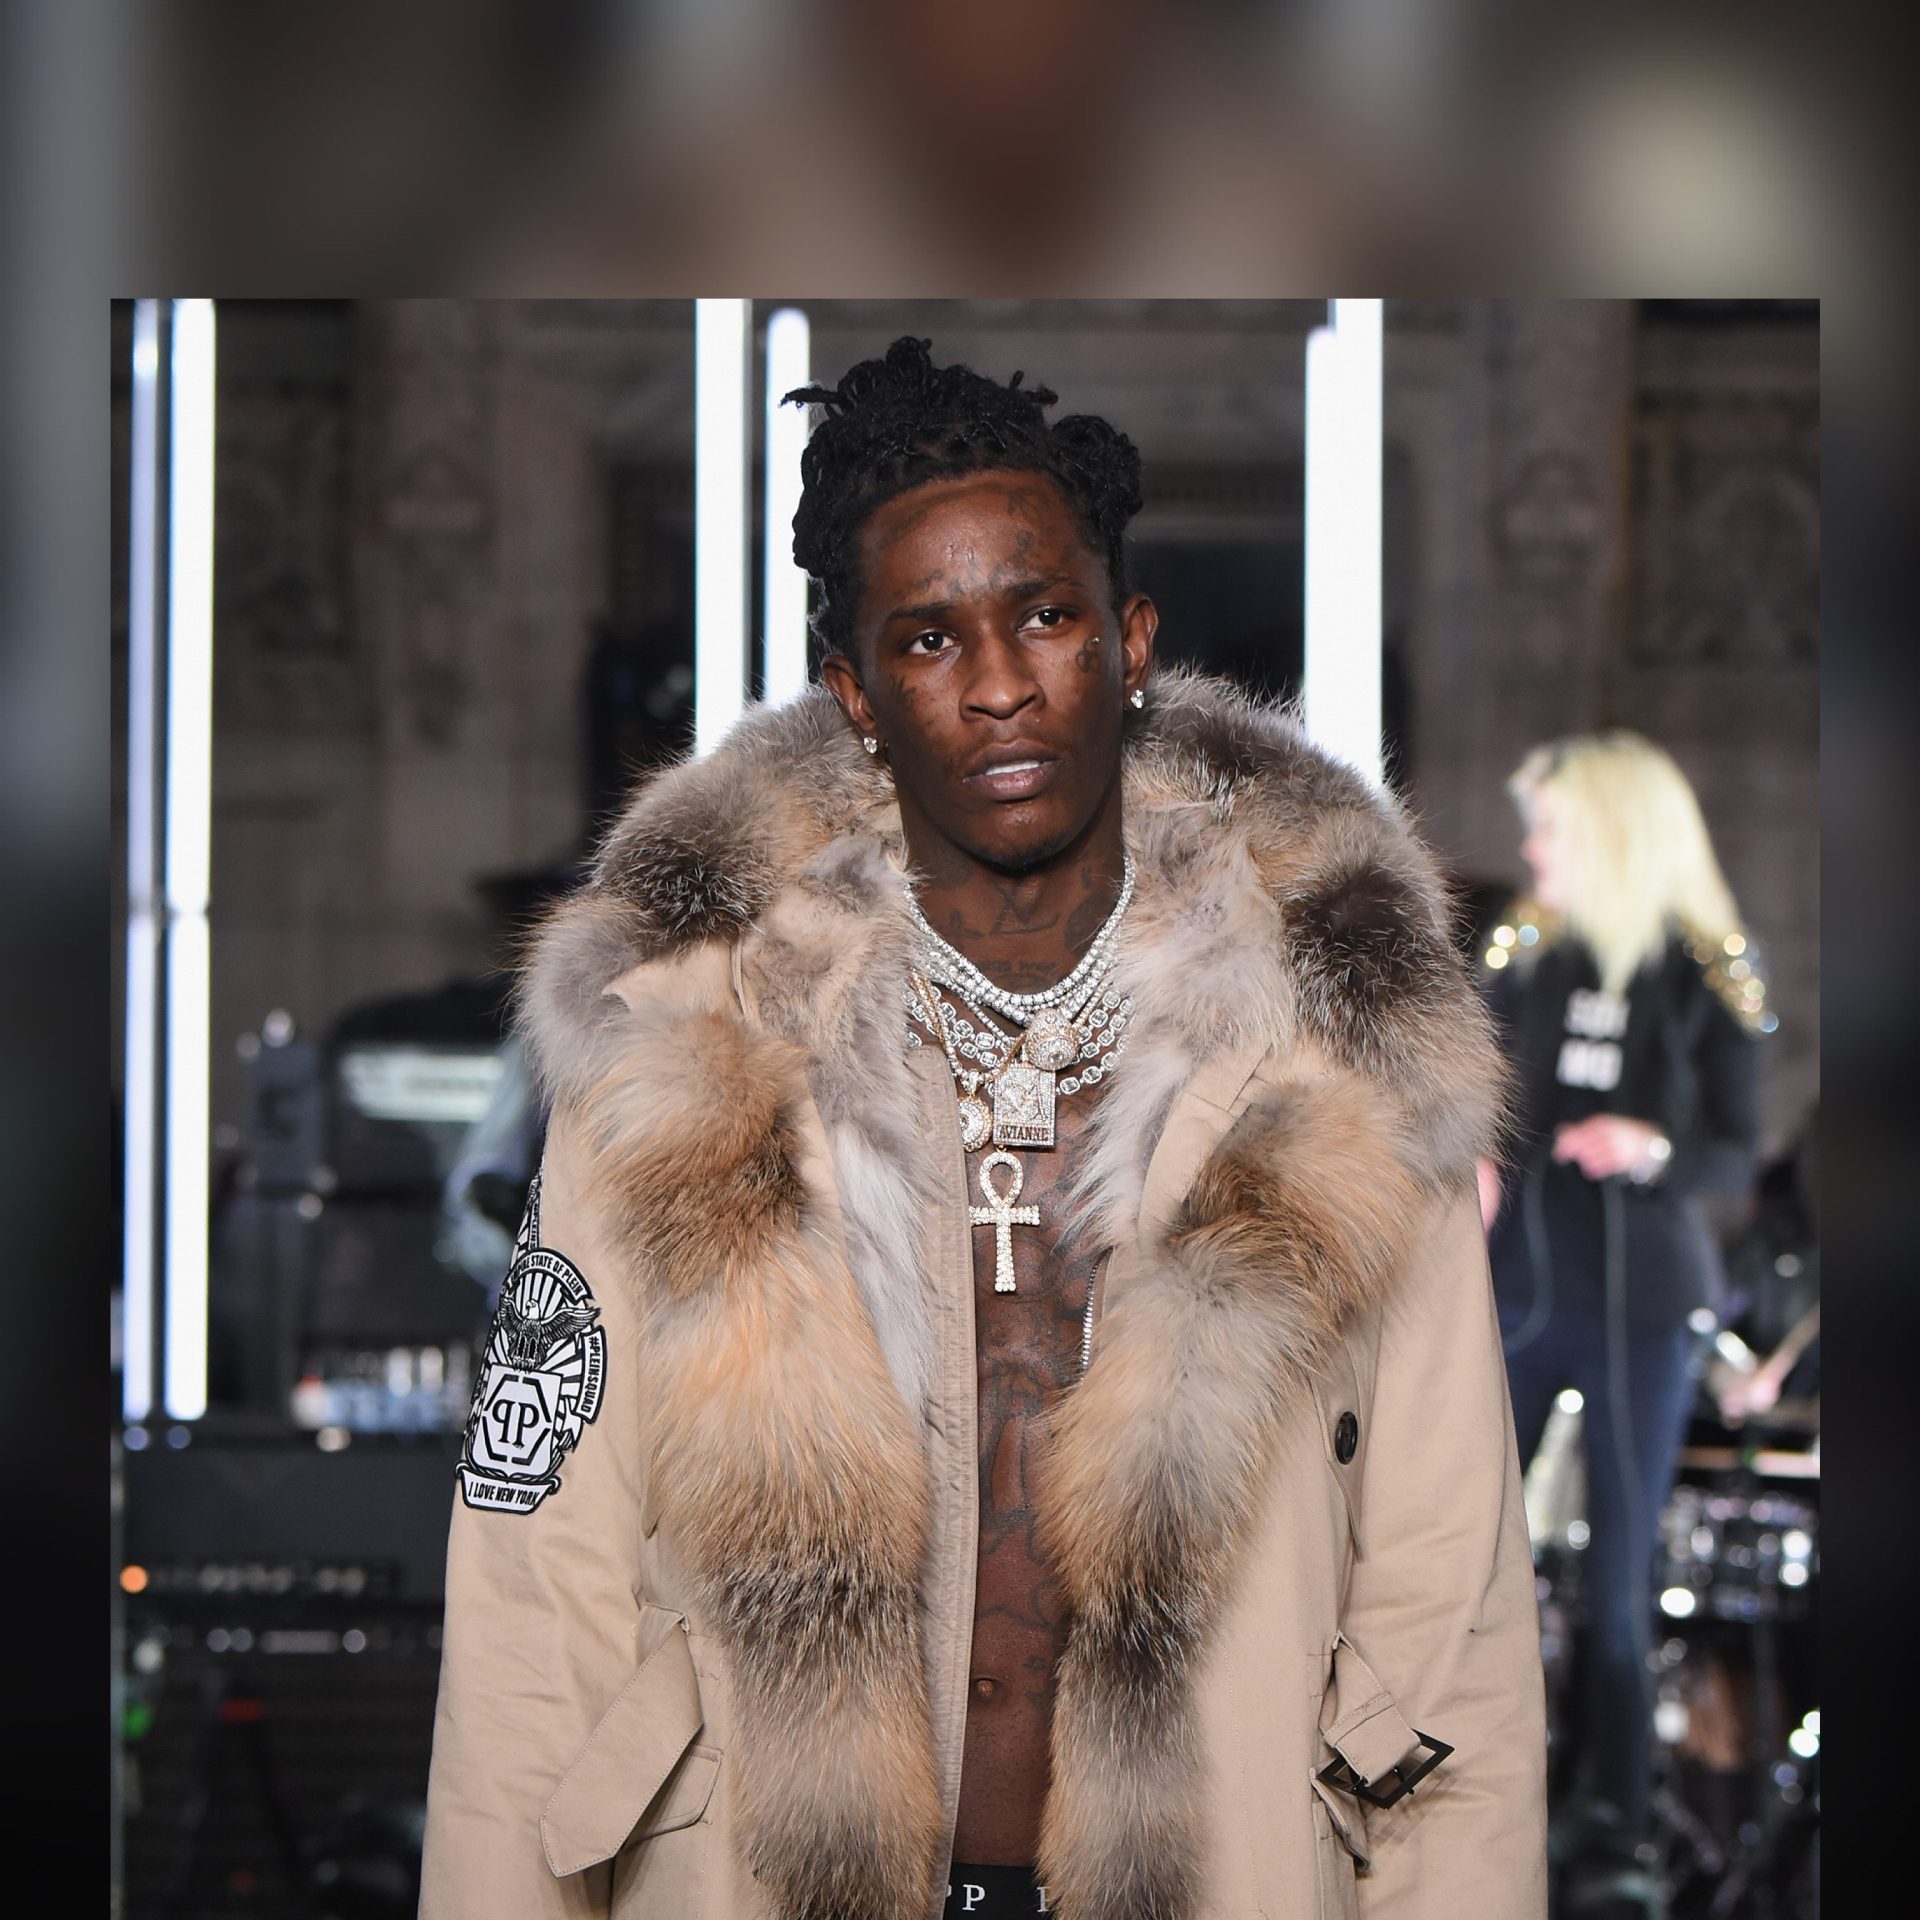 (Update) Young Thug's Lawyer Files Emergency Motion For Bond Hearing, Alleges Jail Conditions Are 